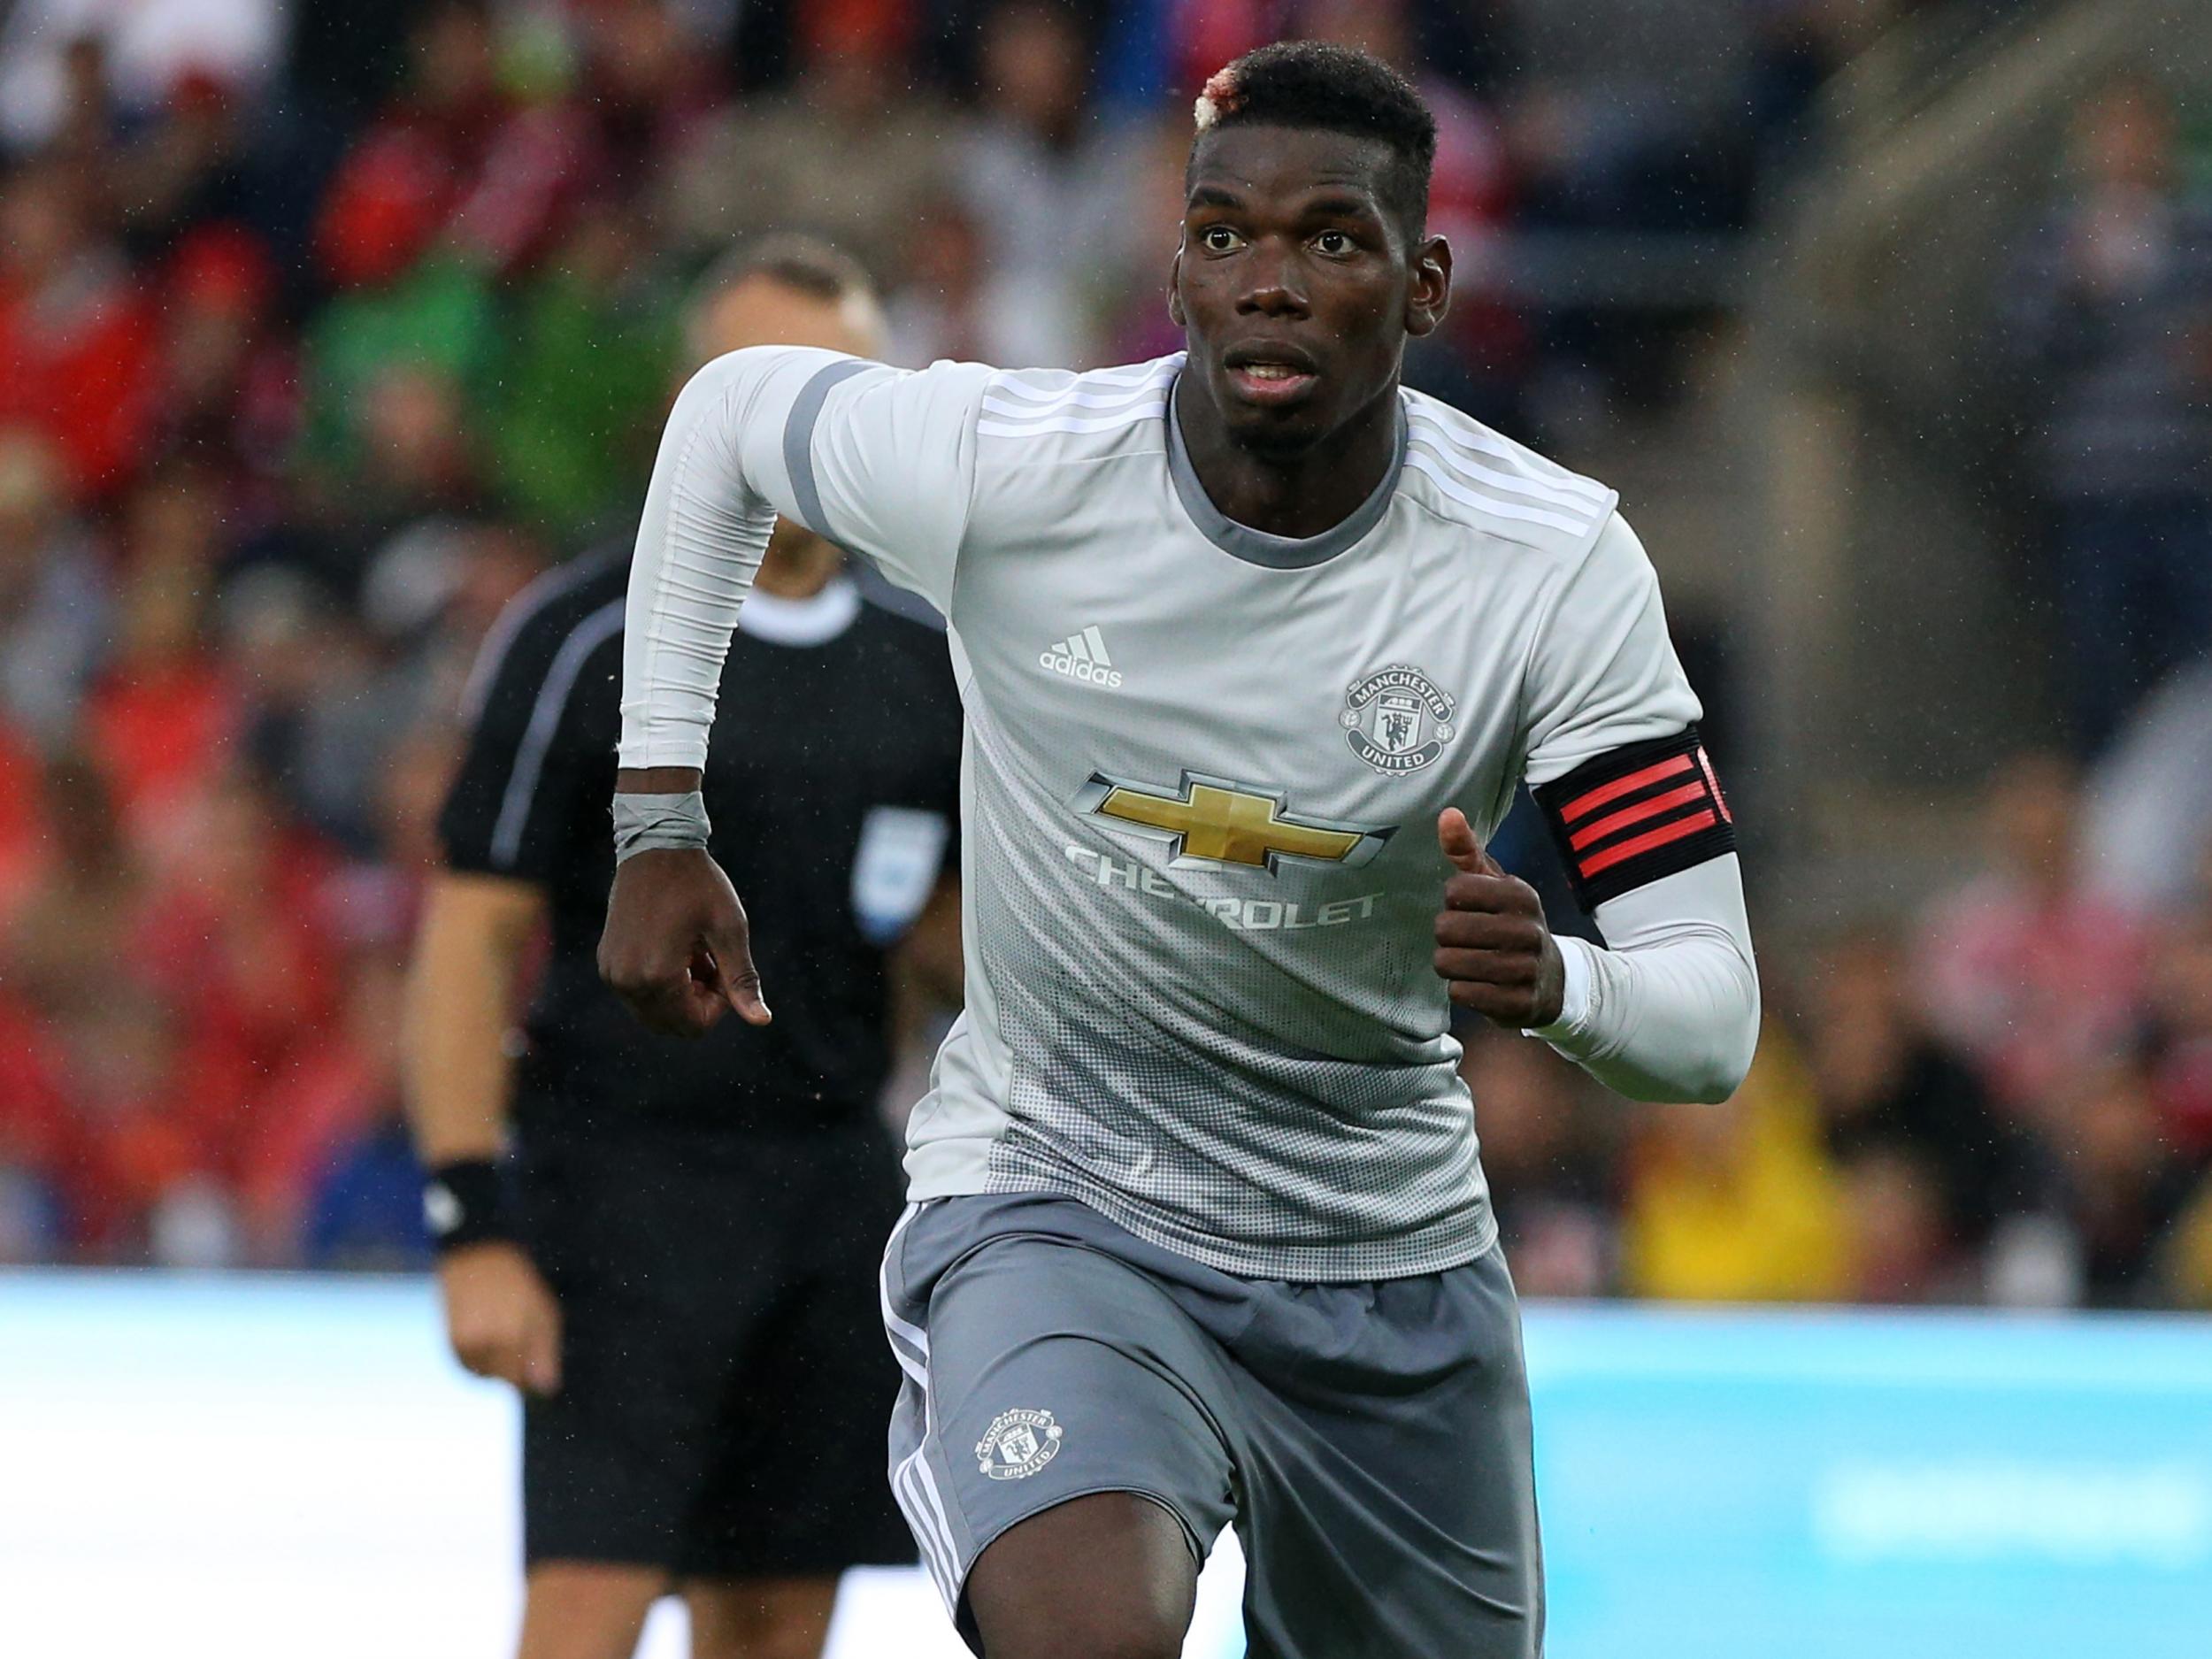 Pogba will be playing in a more advanced position this season